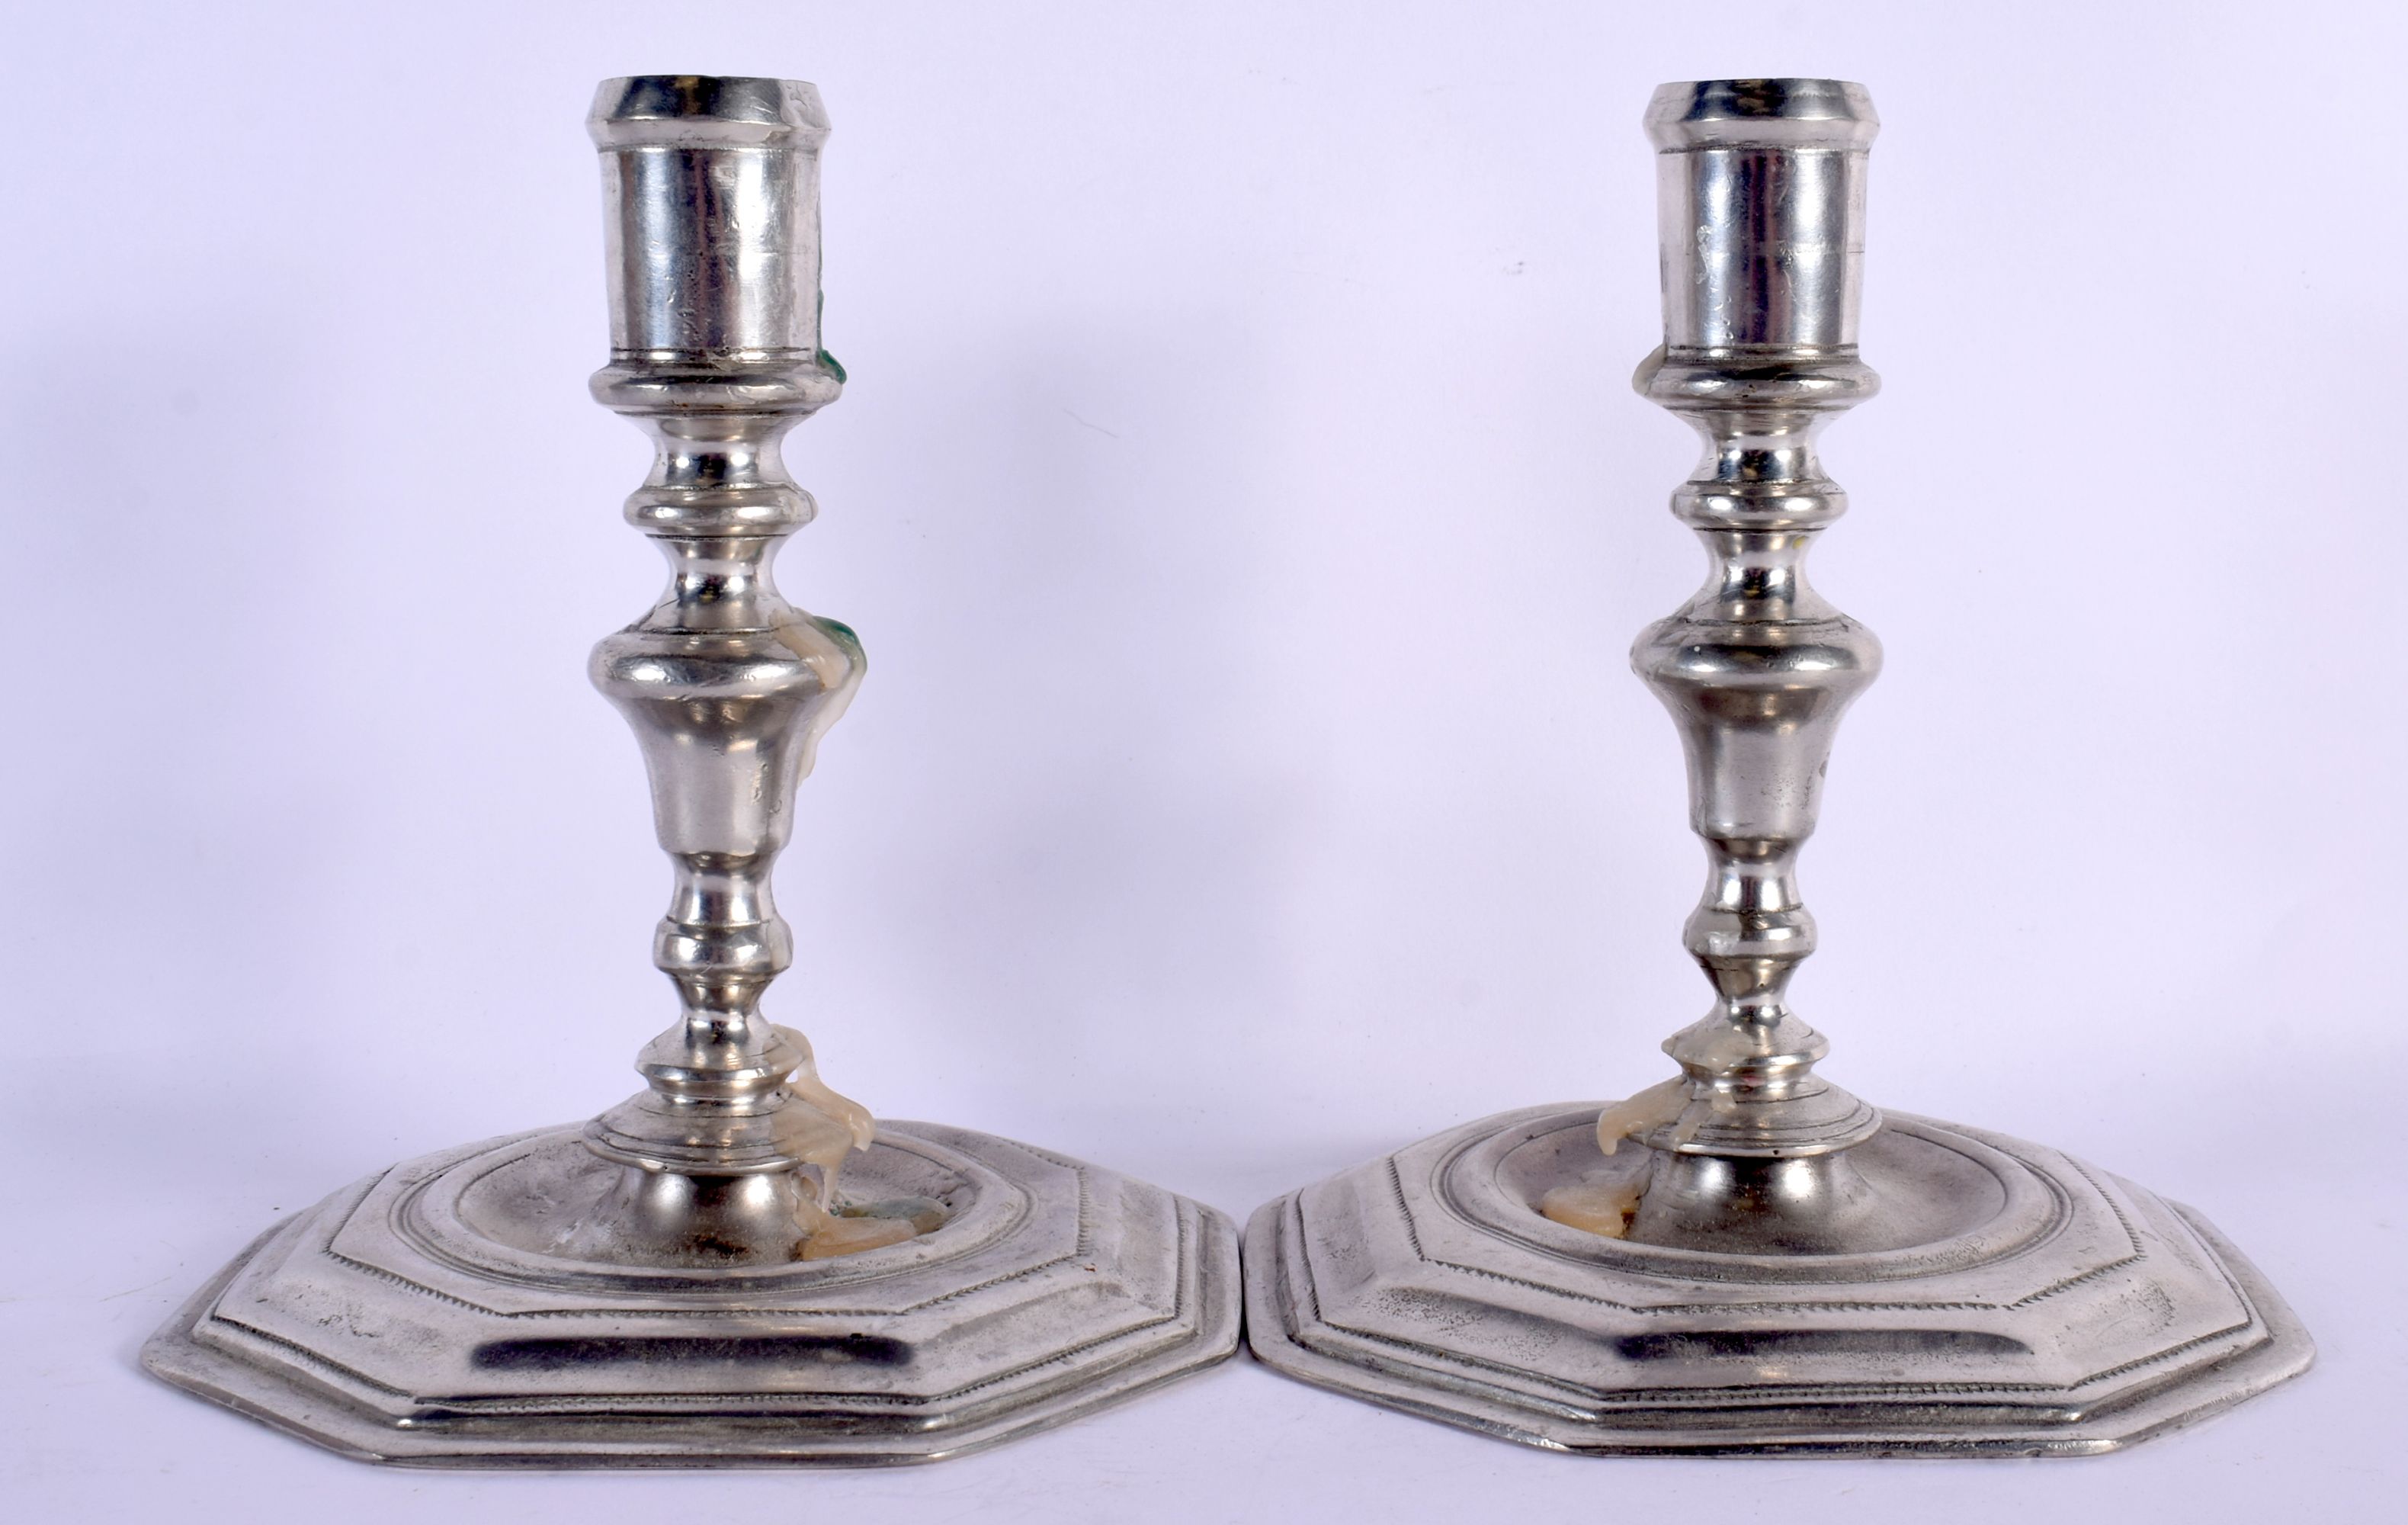 TWO PAIRS OF ANTIQUE CANDLESTICKS. Largest 30 cm high. (4) - Image 5 of 8